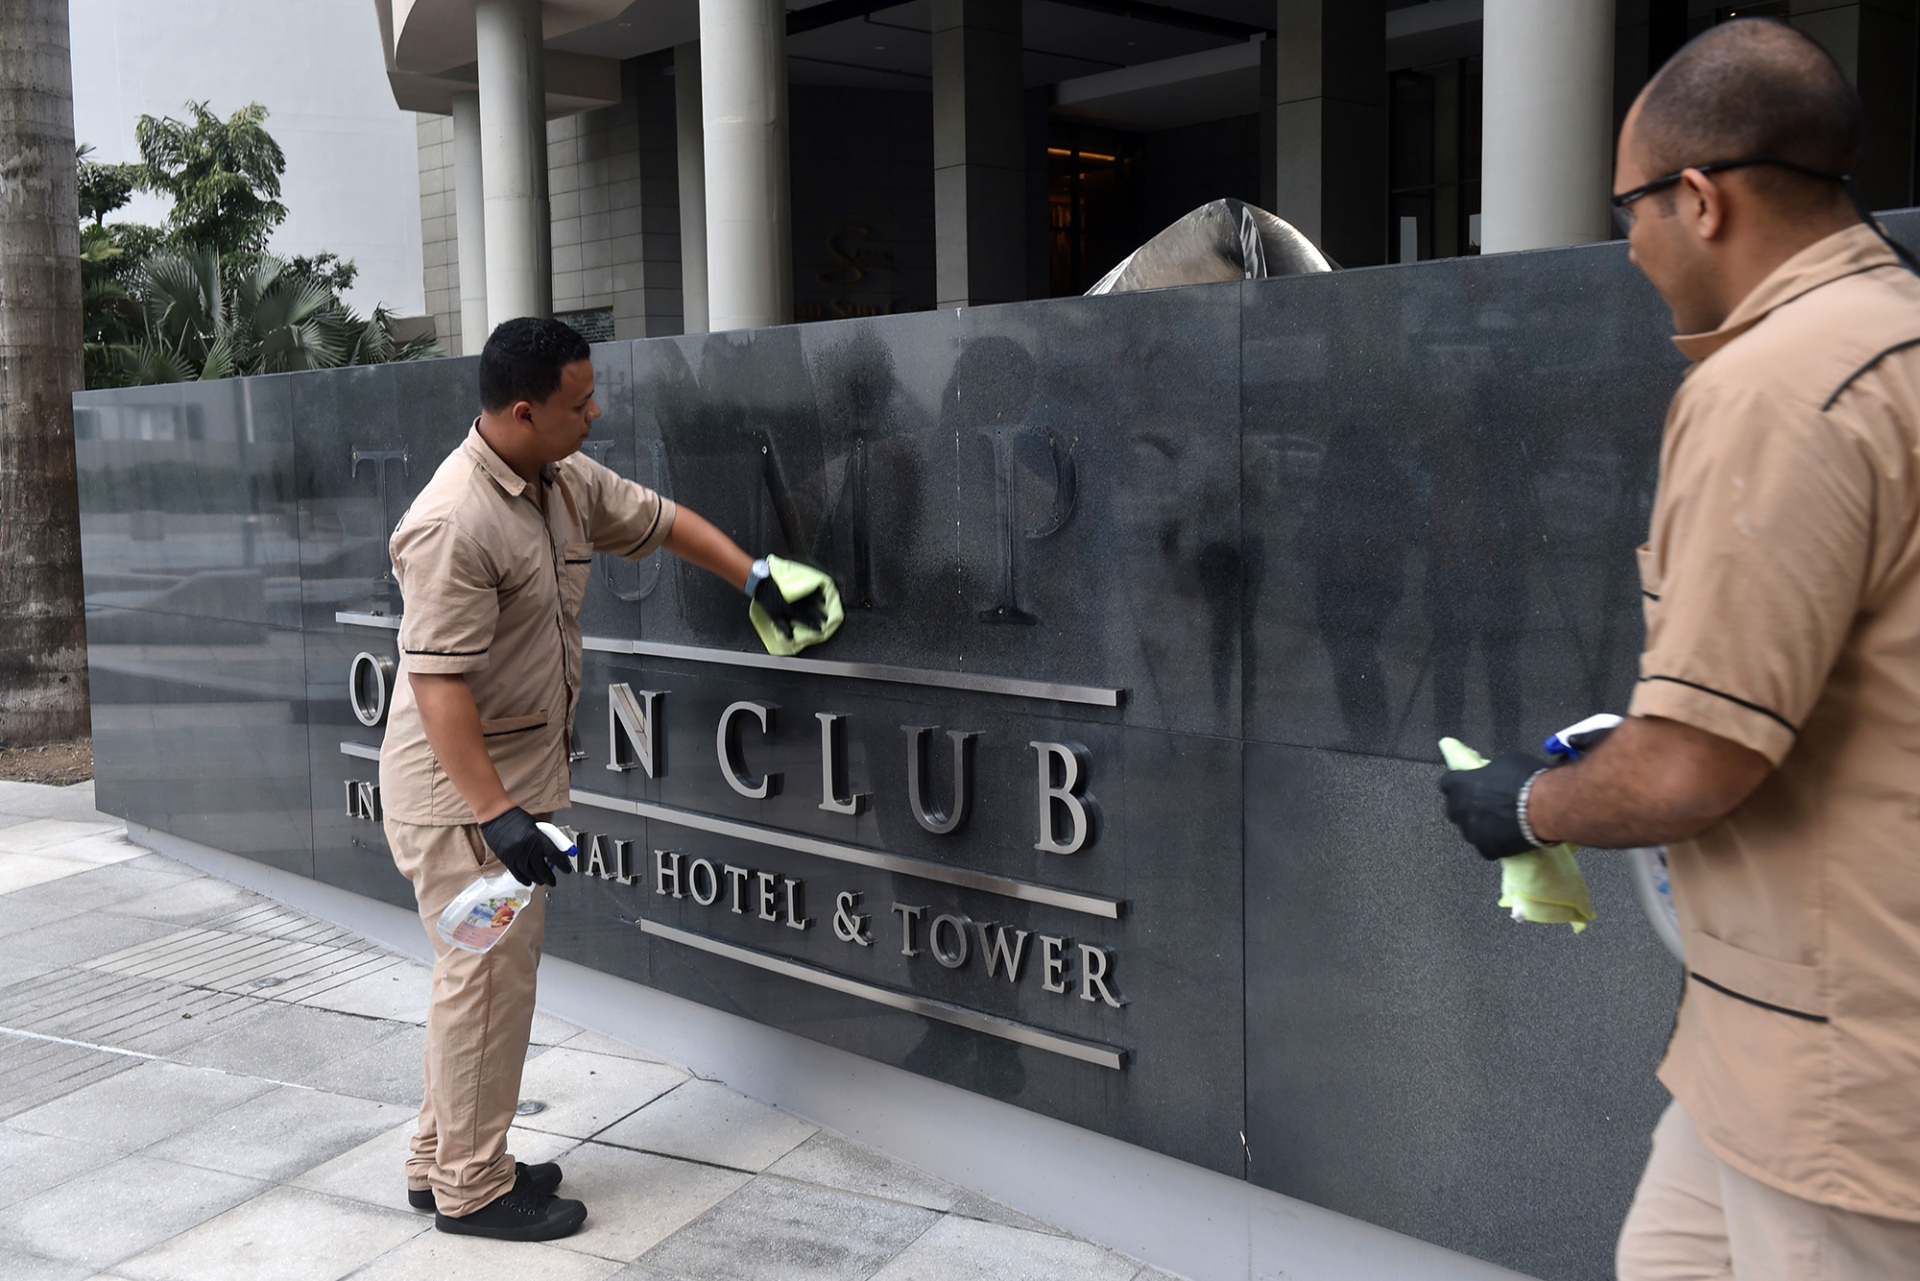 Workers clean a sign after the Trump sign letters were removed, at the Trump Hotel in Panama City on March 5, 2018.&nbsp;